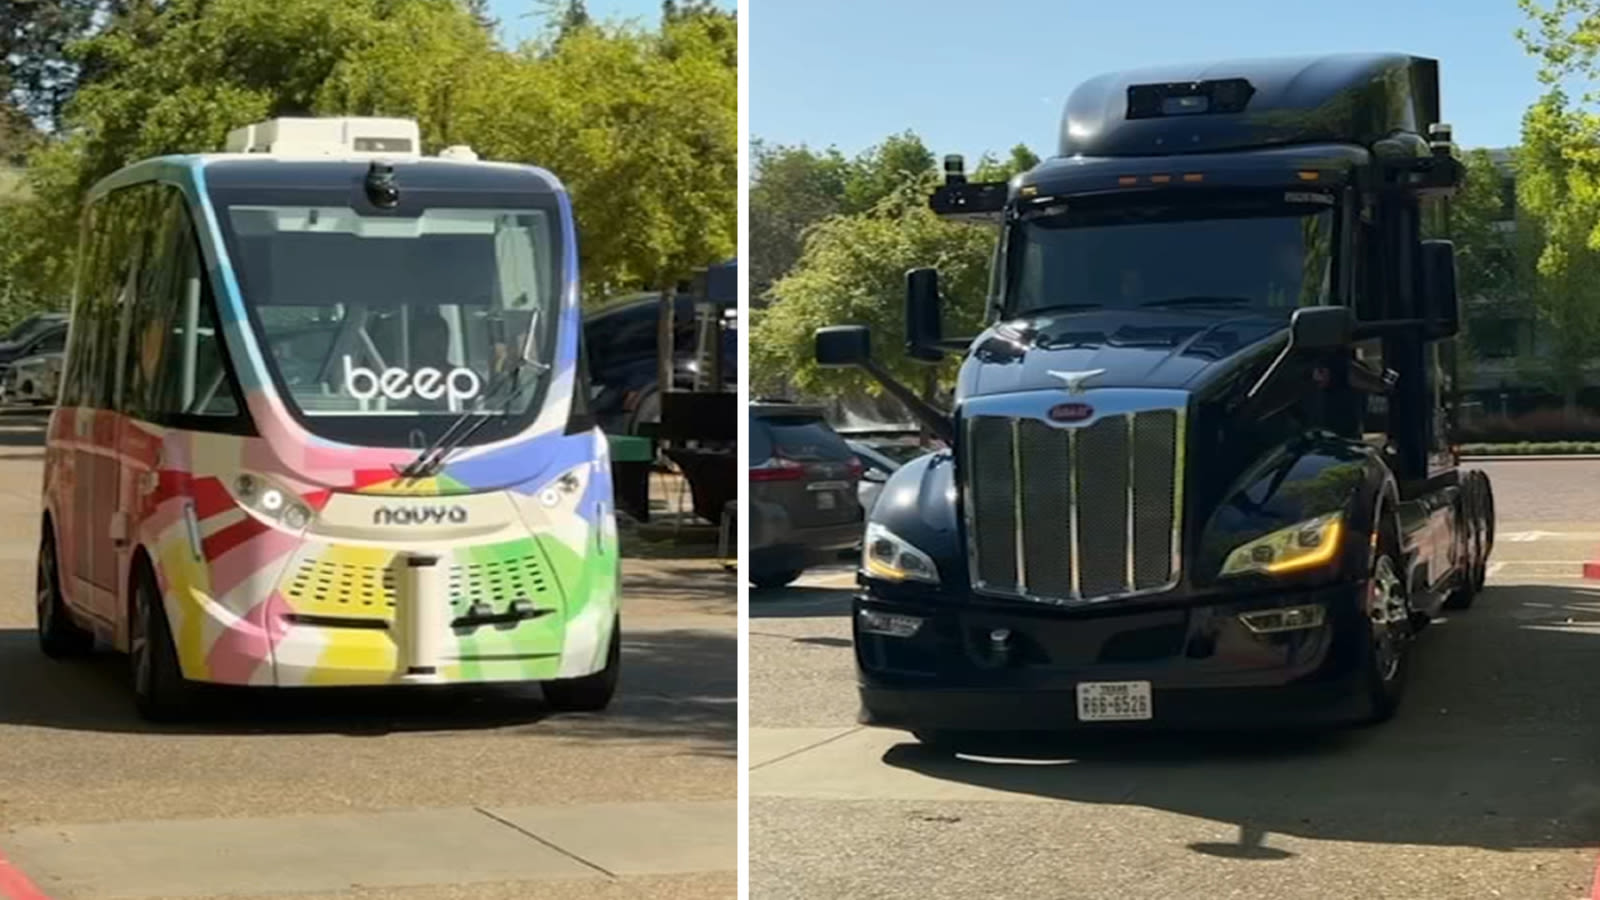 Here's a look at autonomous vehicles being showcased at mobility summit in San Ramon